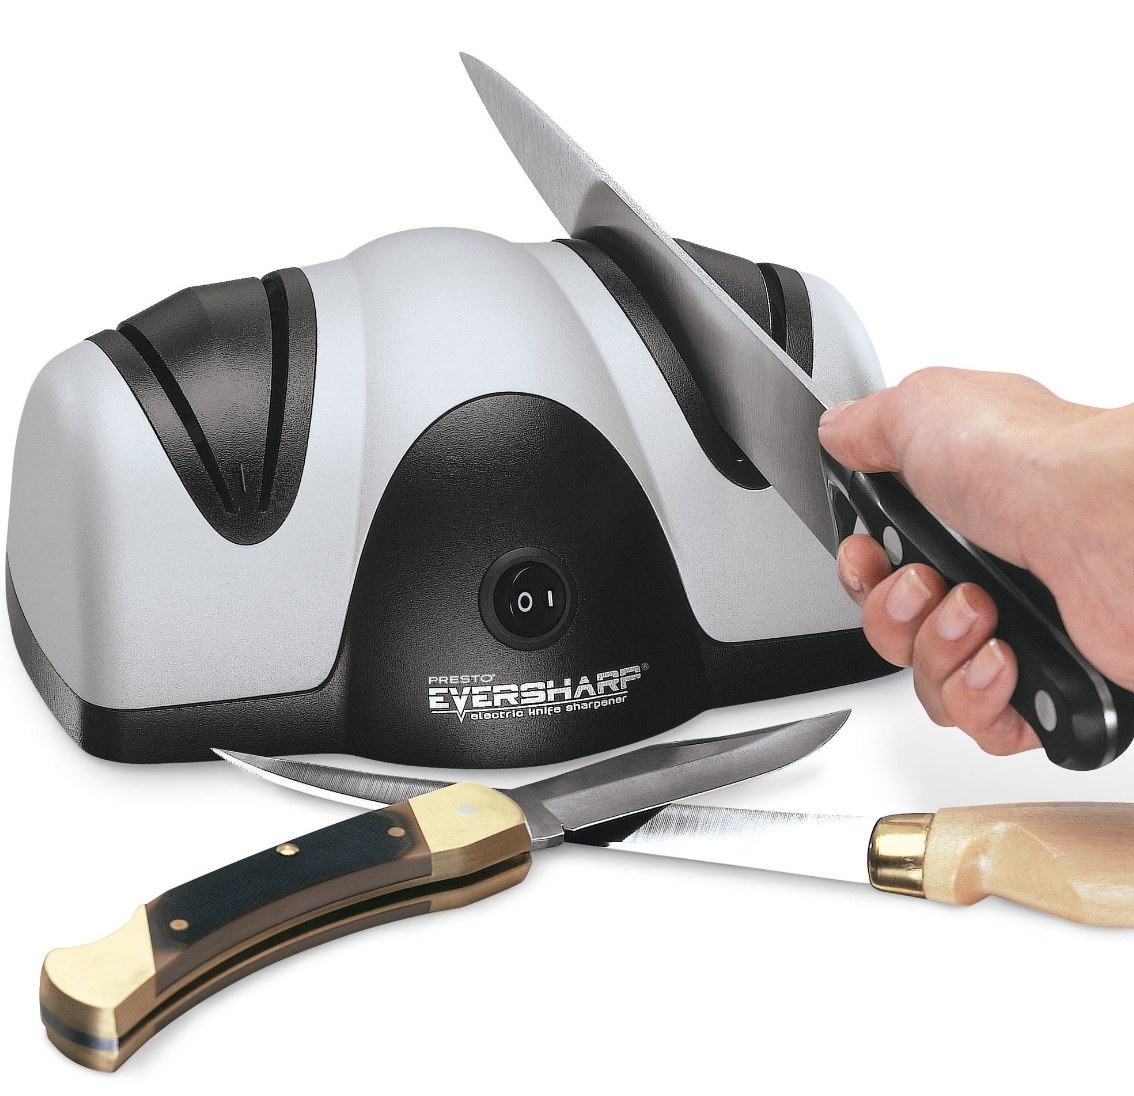 The black and silver machine says &quot;PRESTO EVERSHARP ELECTRIC KNIFE SHARPENER&quot; and has three knifes around it